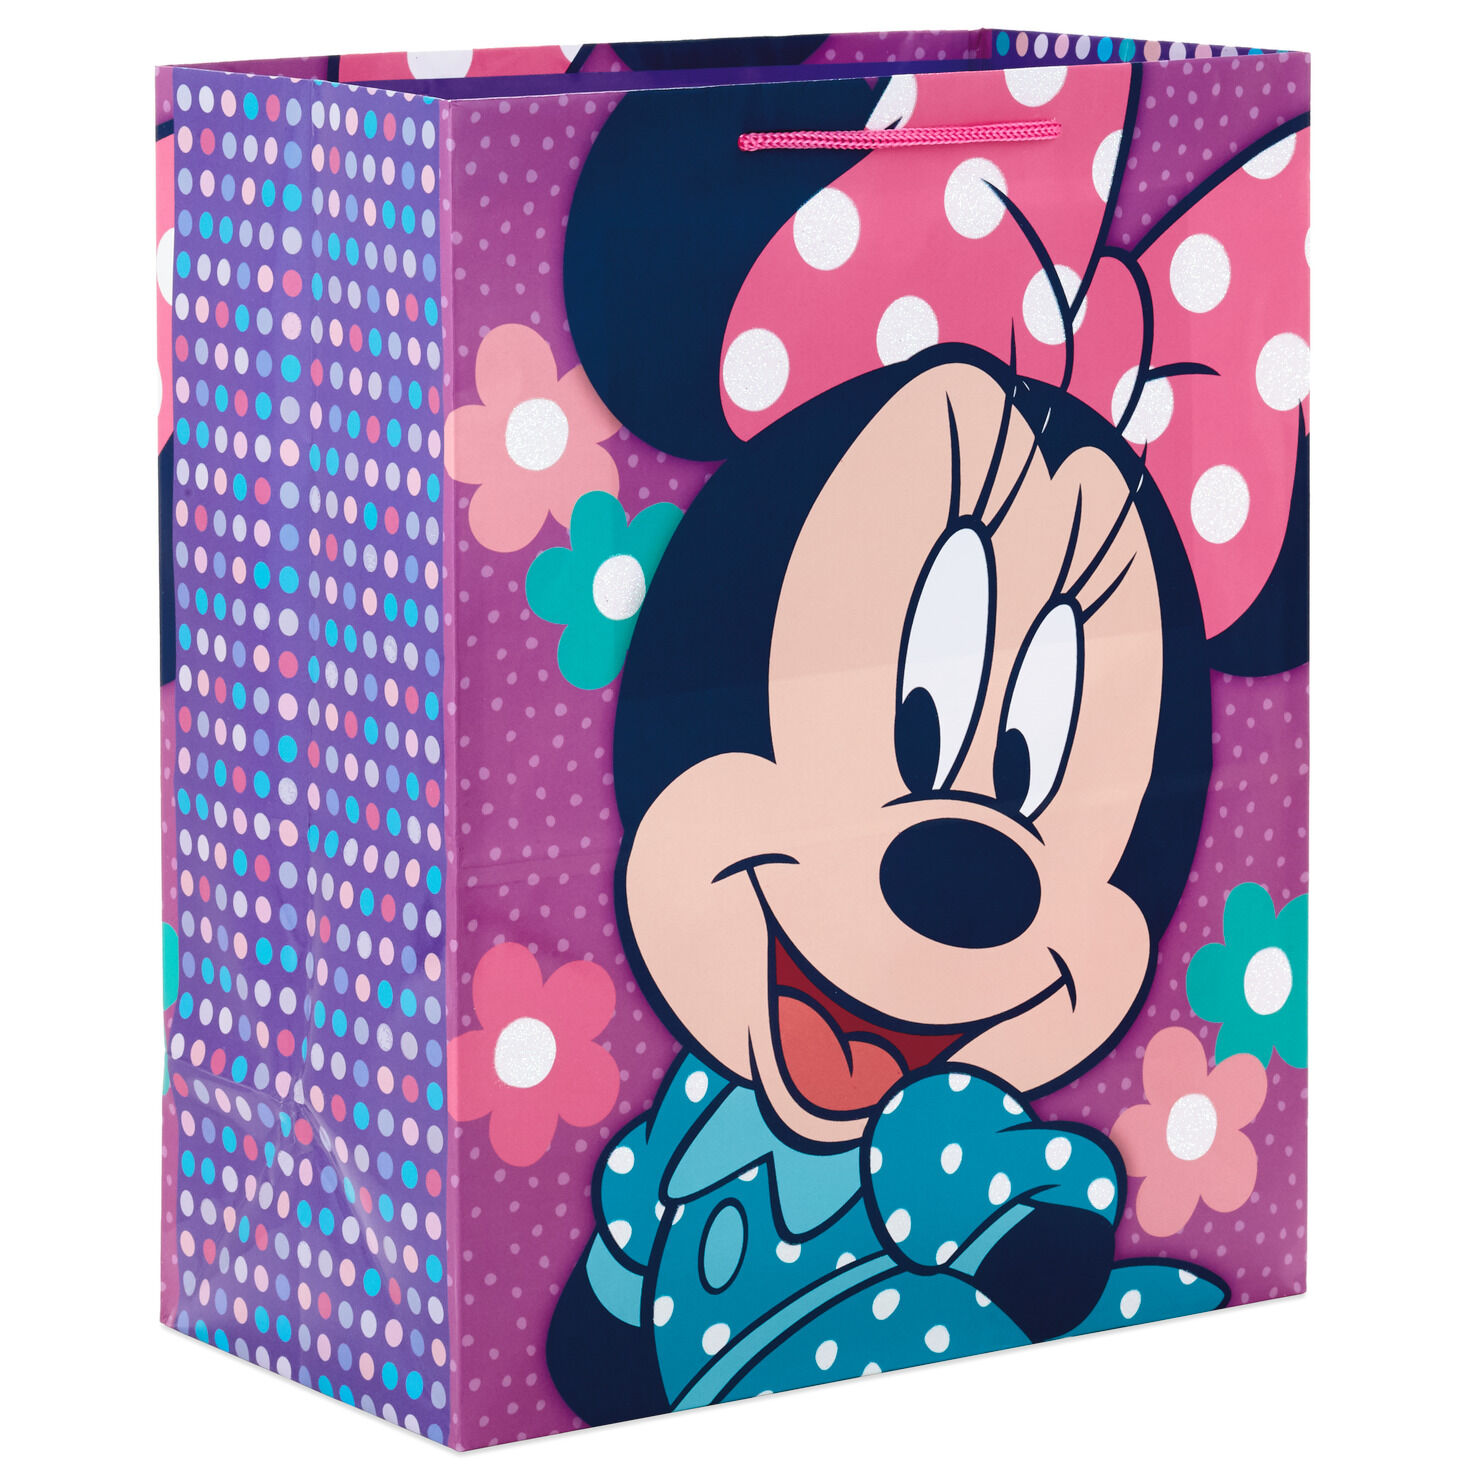 DISNEY PARKS MINNIE MOUSE CHARACTER GIFT WRAP SET GIFTS LOOK LIKE MINNIE MOUSE 